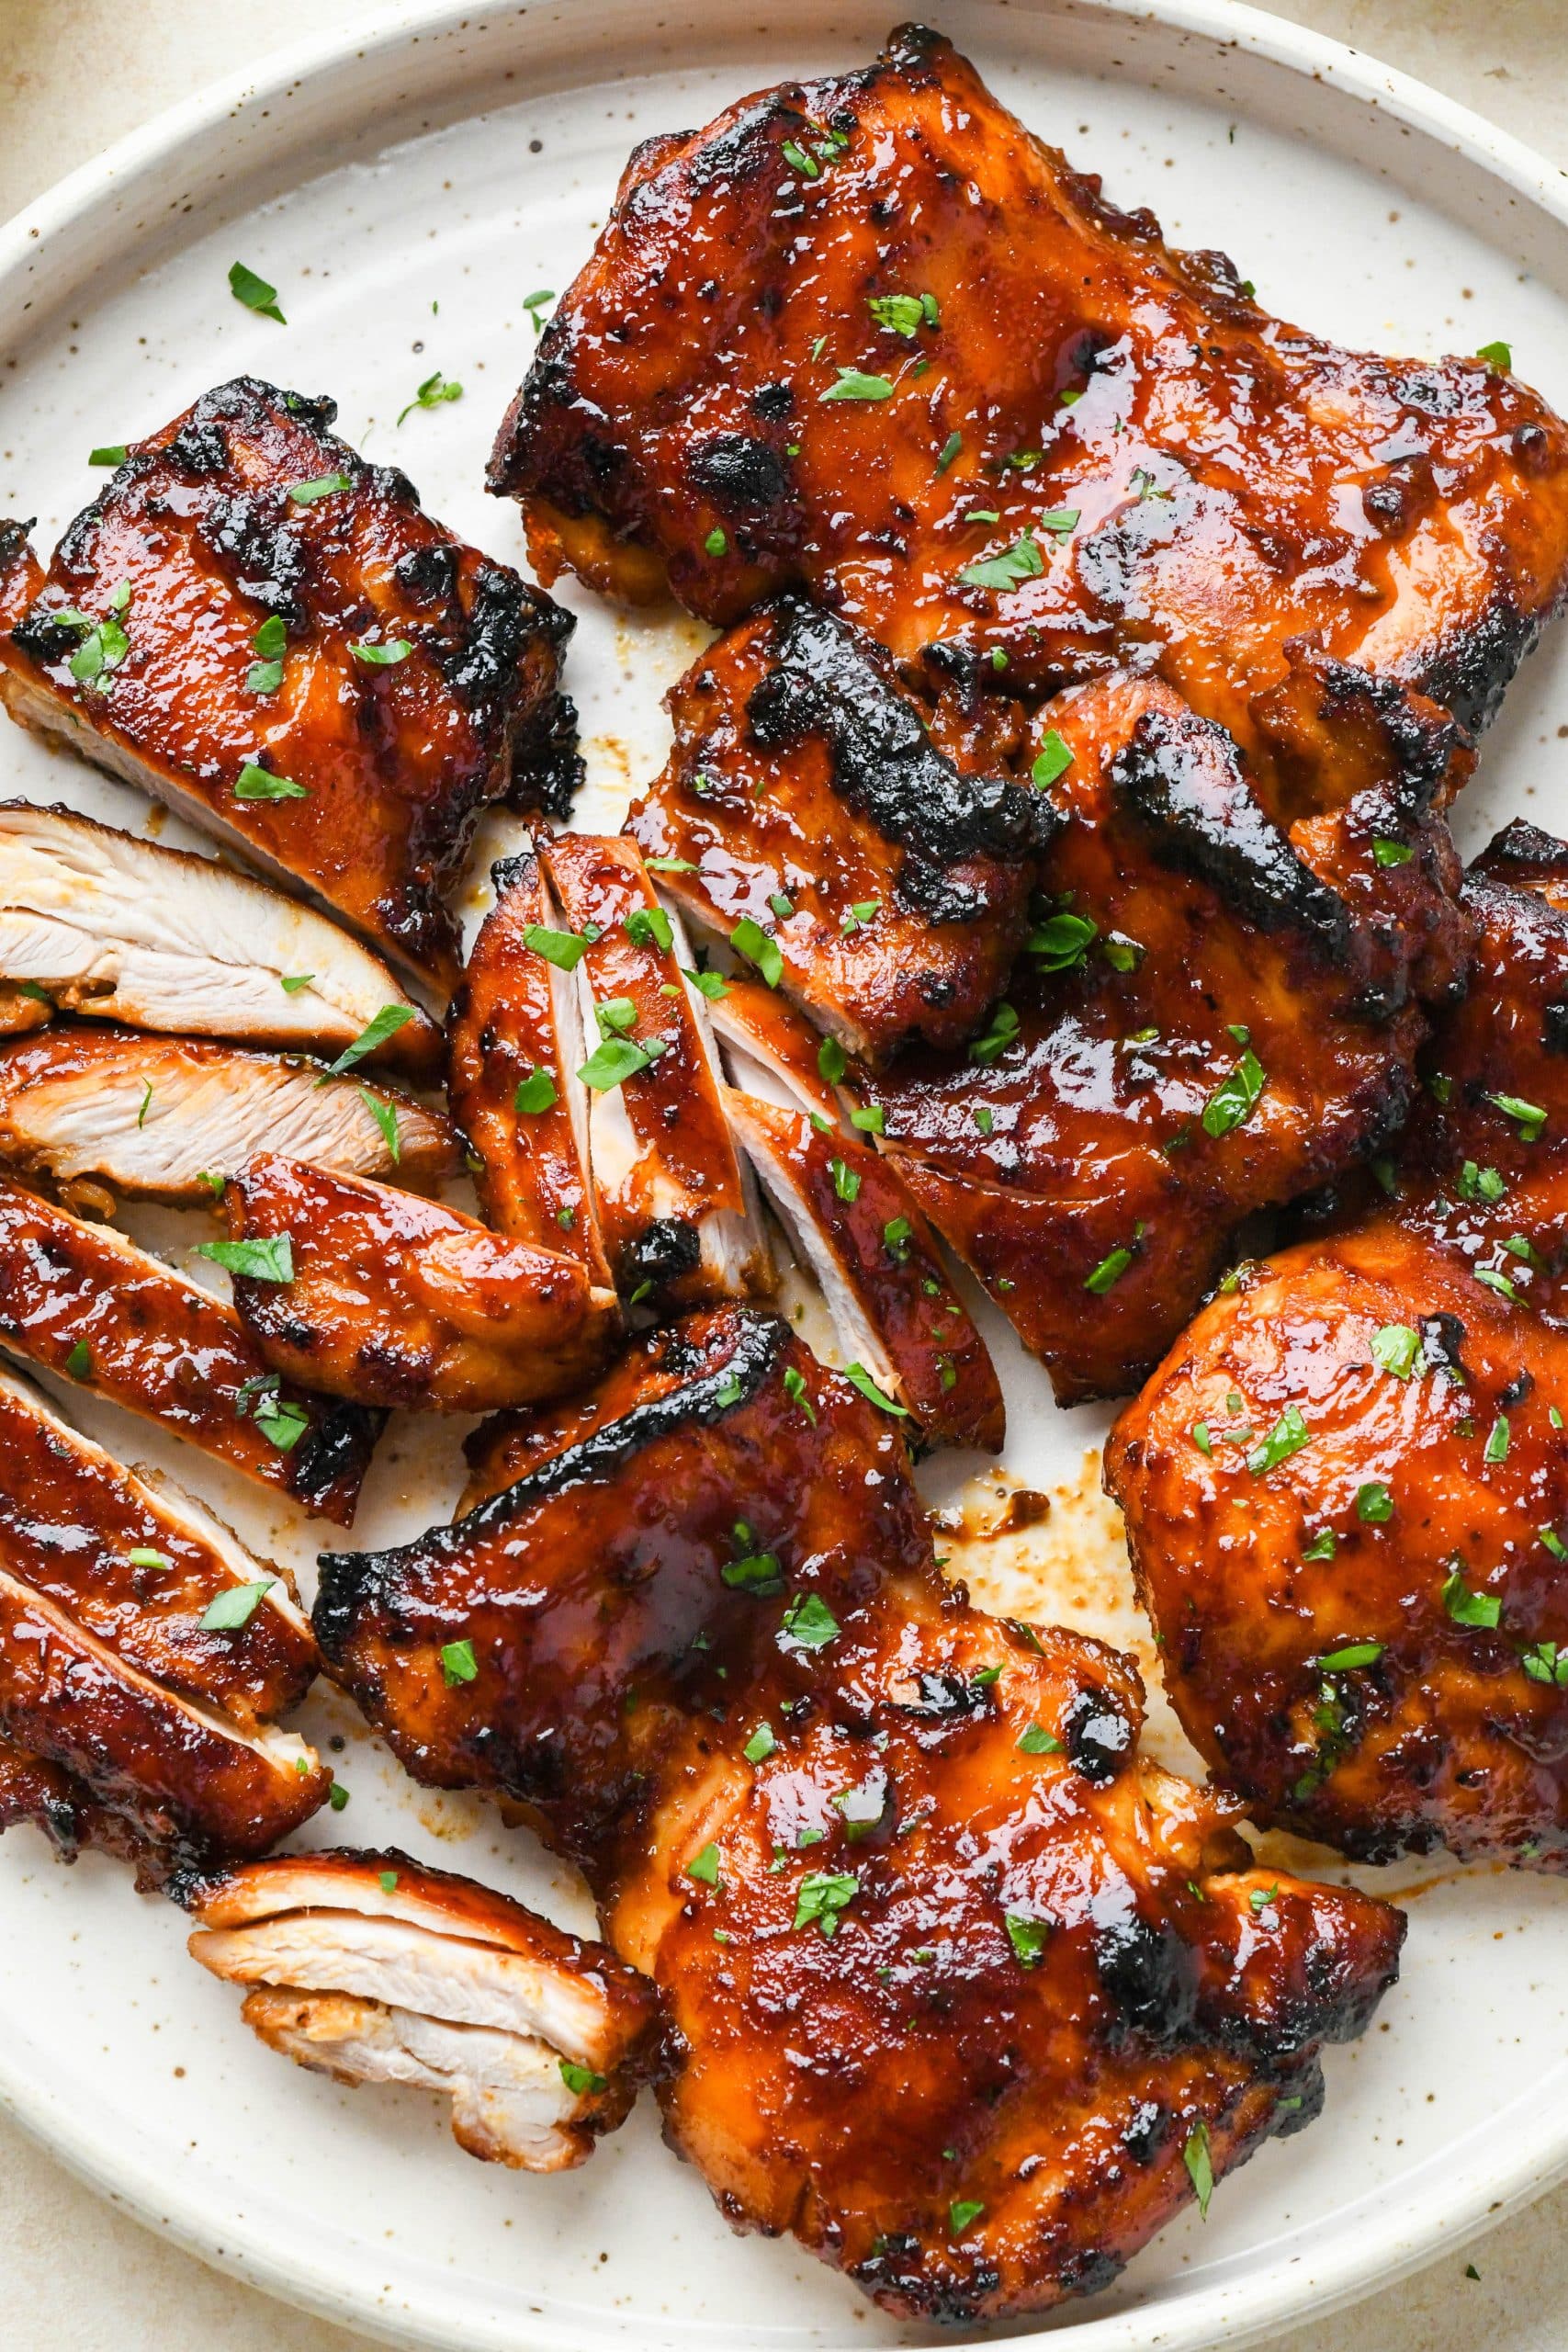 https://nyssaskitchen.com/wp-content/uploads/2022/07/BBQ-Chicken-Thighs-in-the-Oven-18-scaled.jpg